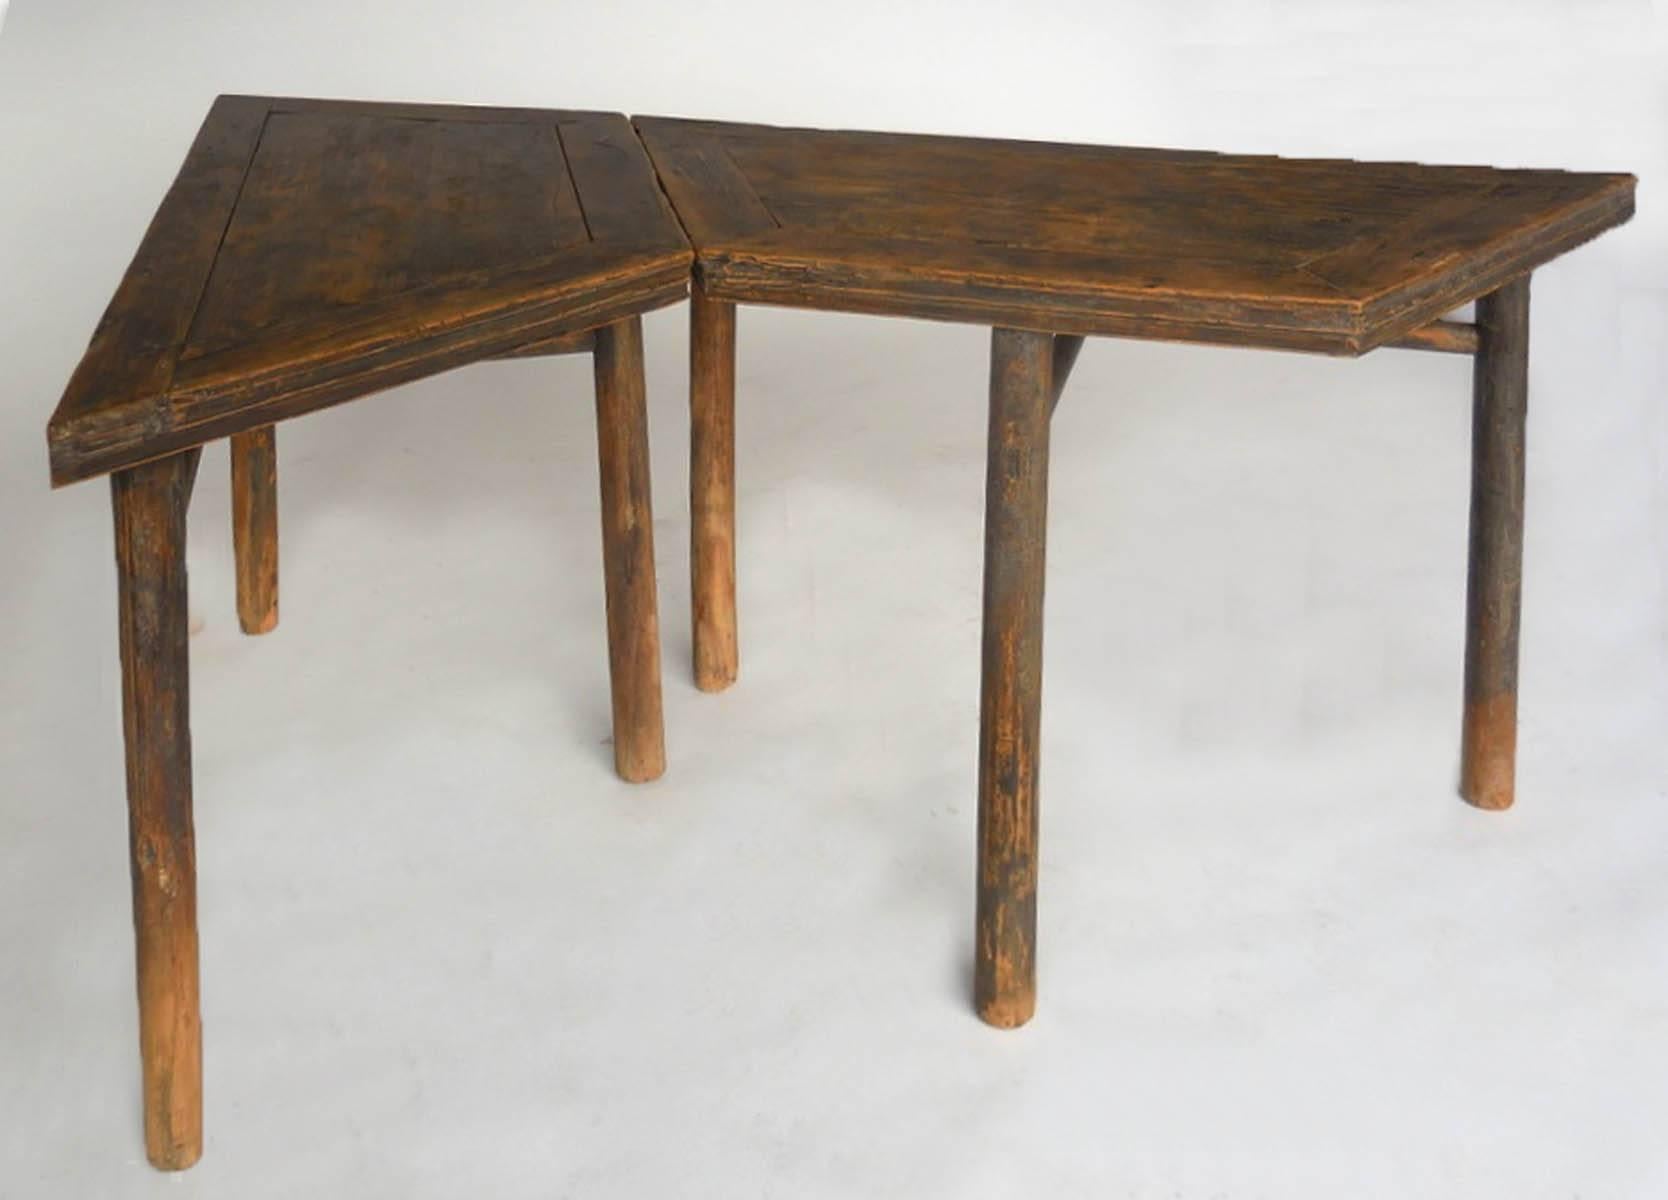 Elm Pair of 19th Century Chinese Modular Demilune Tables